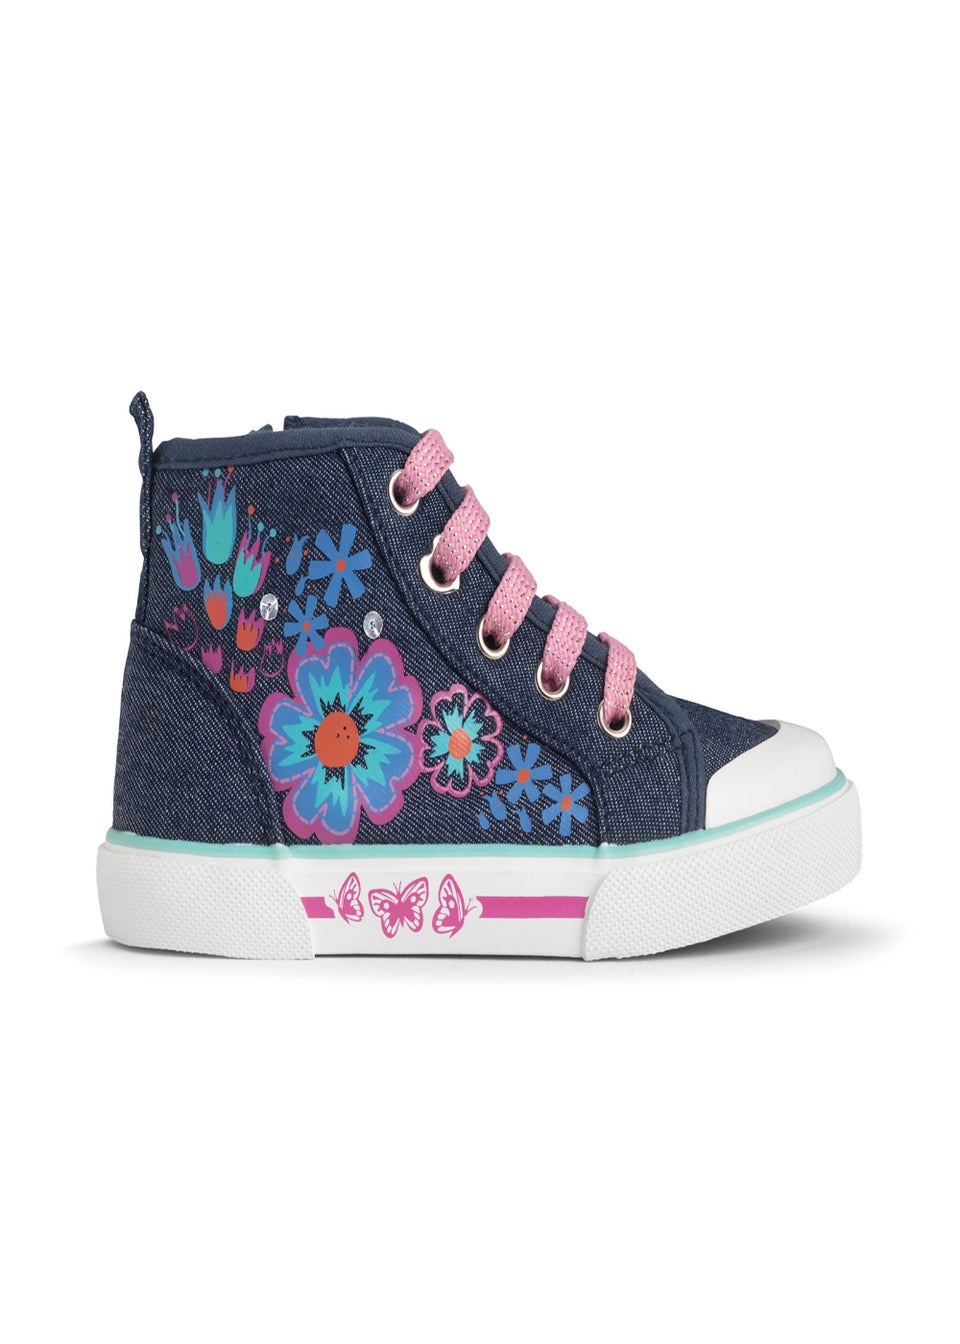 Start-Rite Secret Floral Print Lace Up High Top Trainers